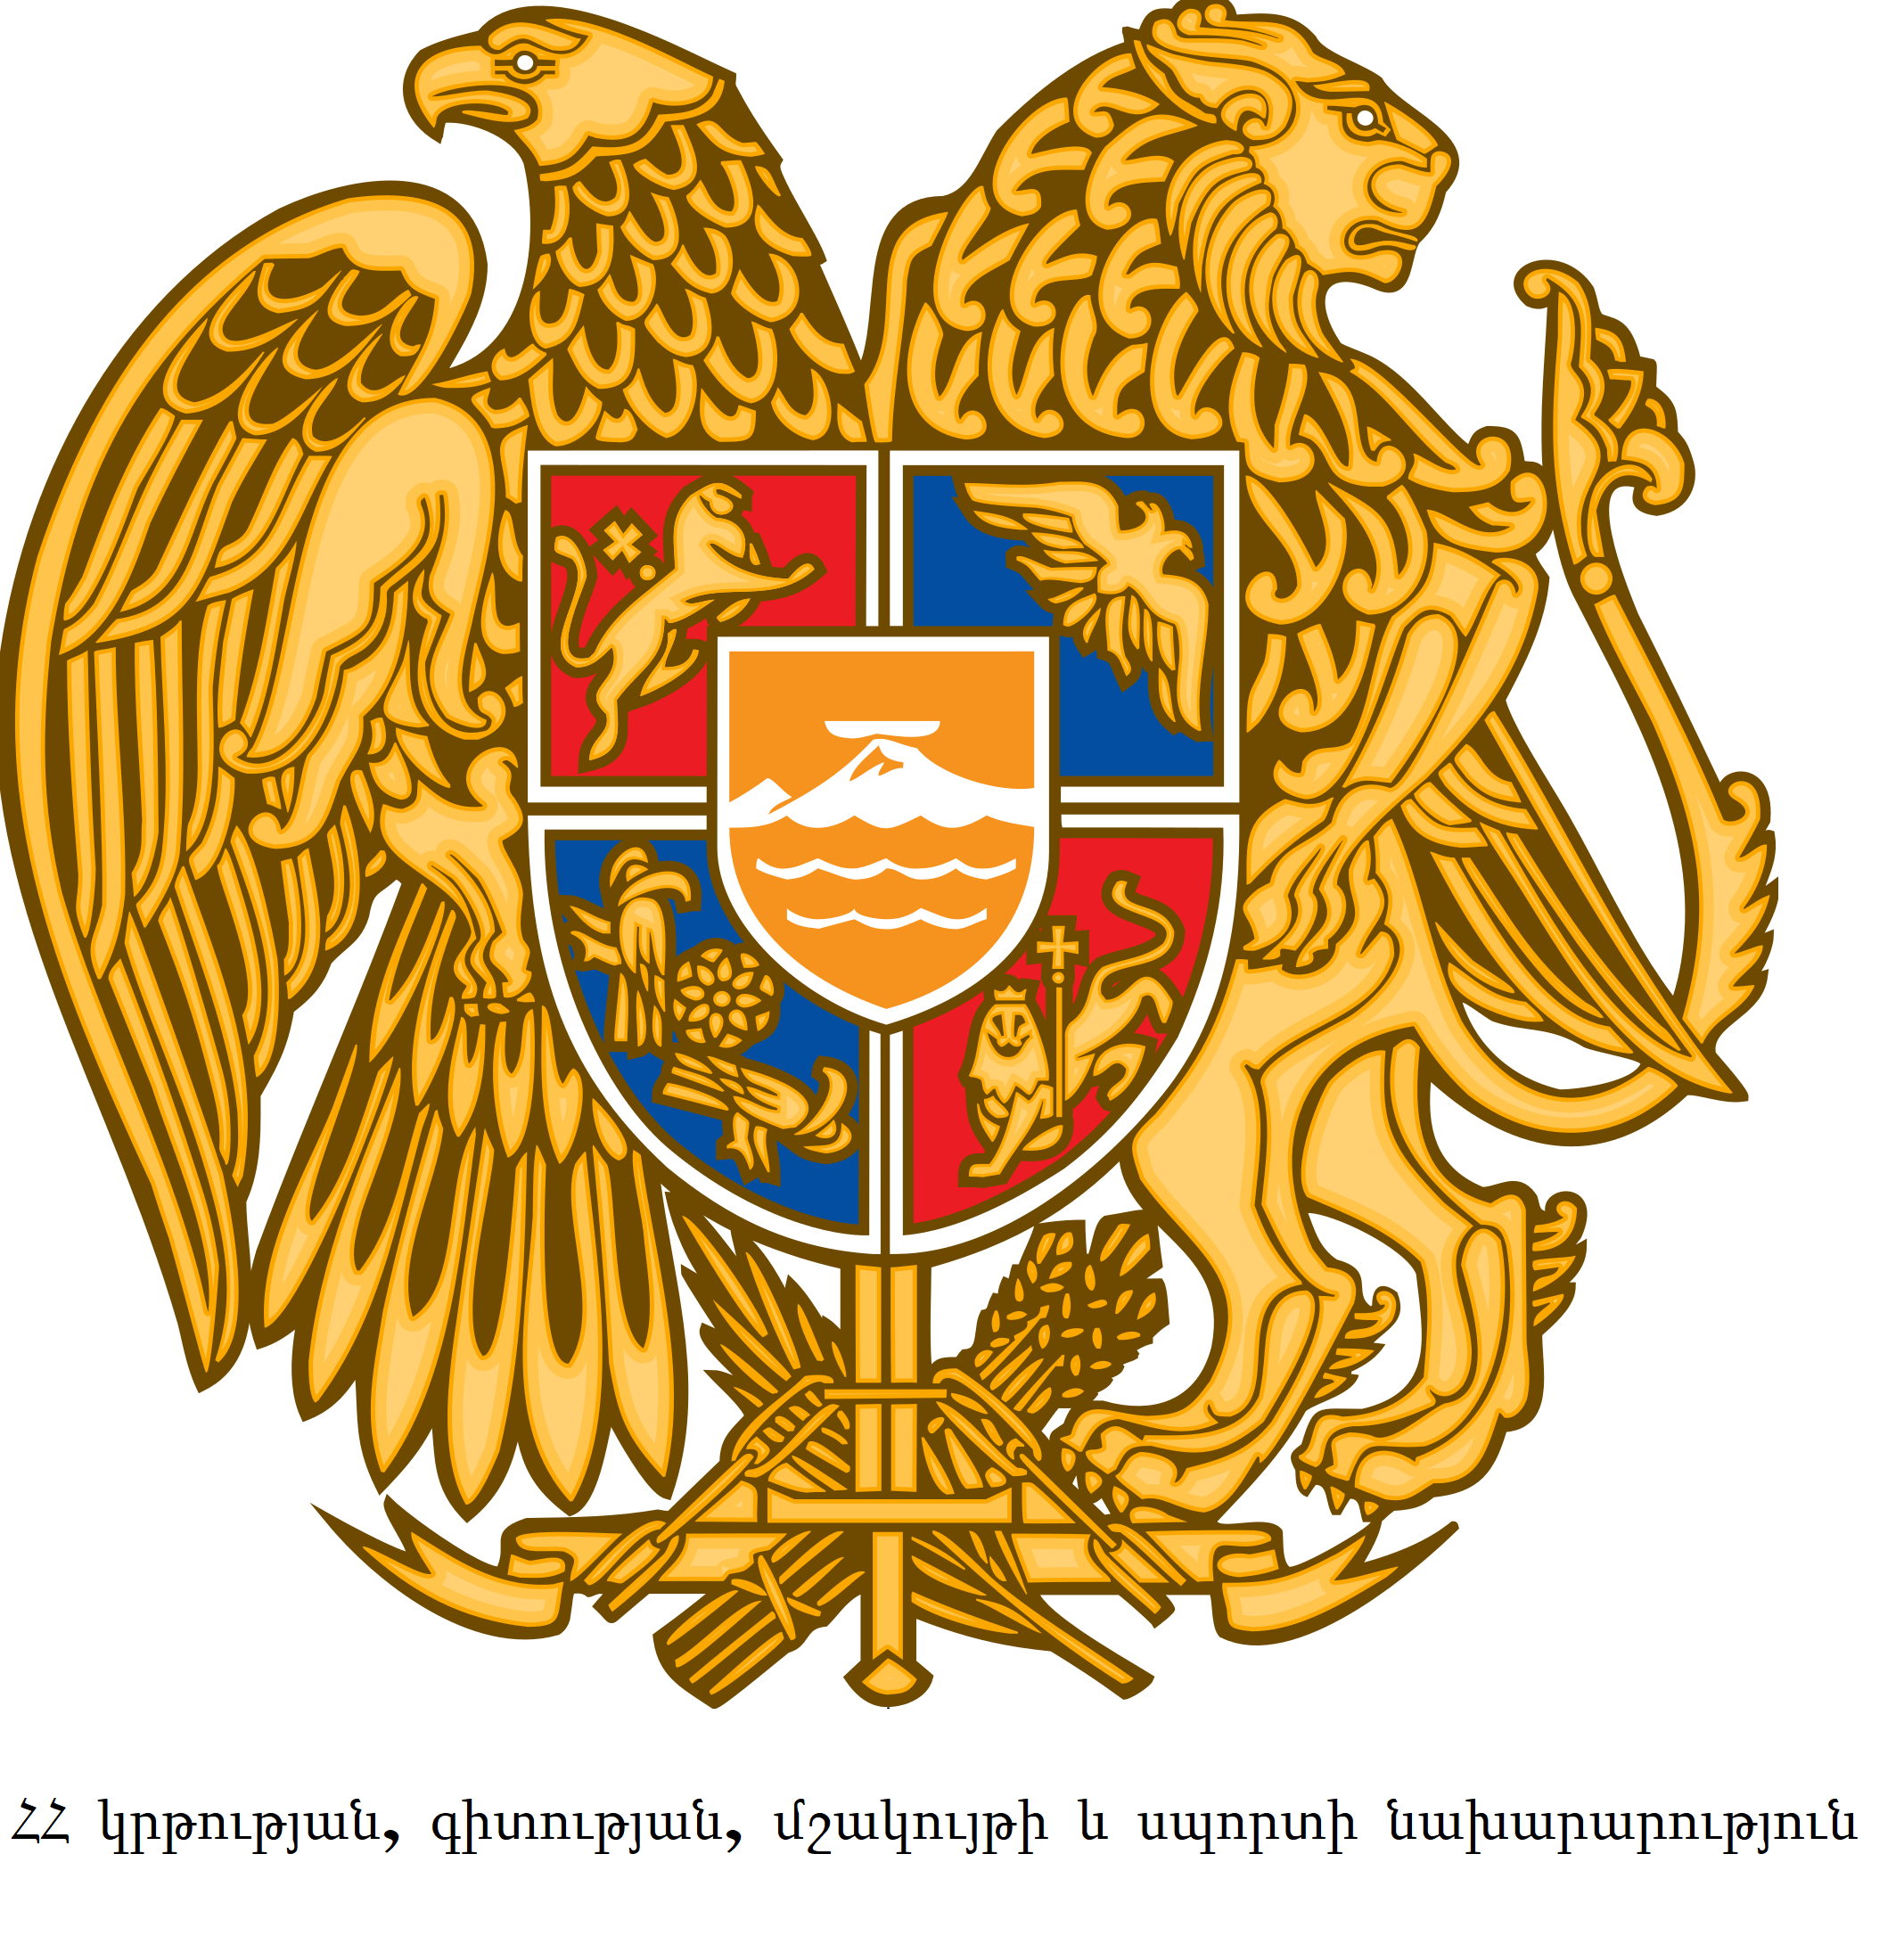 THE MINISTRY OF EDUCATION, SCIENCE, CULTURE AND SPORTS OF THE REPUBLIC OF ARMENIA